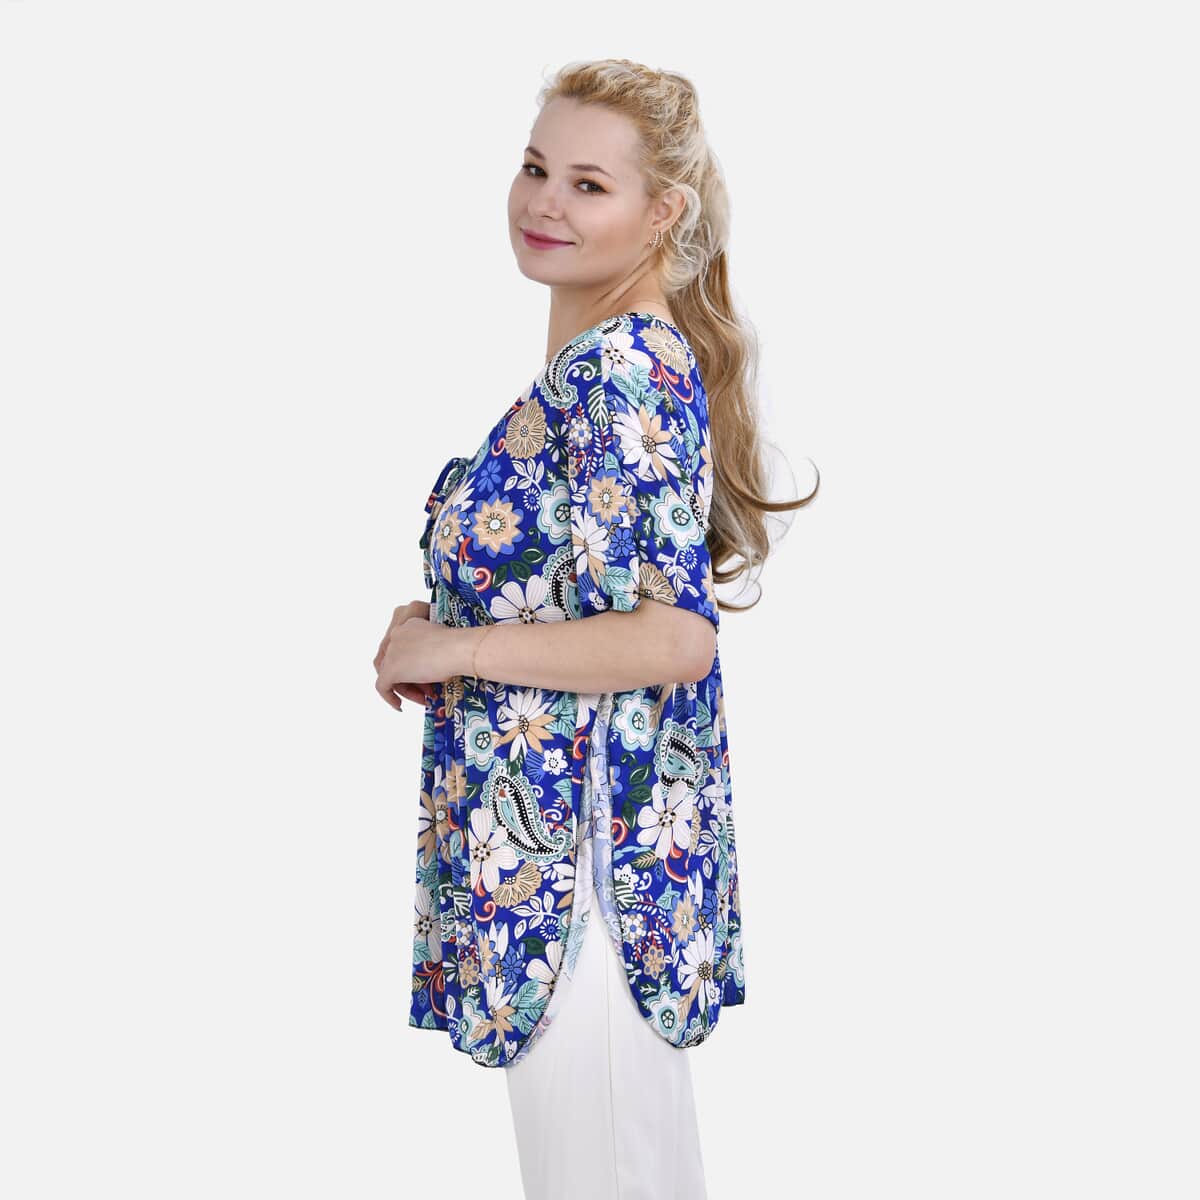 Tamsy Blue Paisley Floral Vneck Top with Kimono Style Arm - One Size Fits Most image number 2